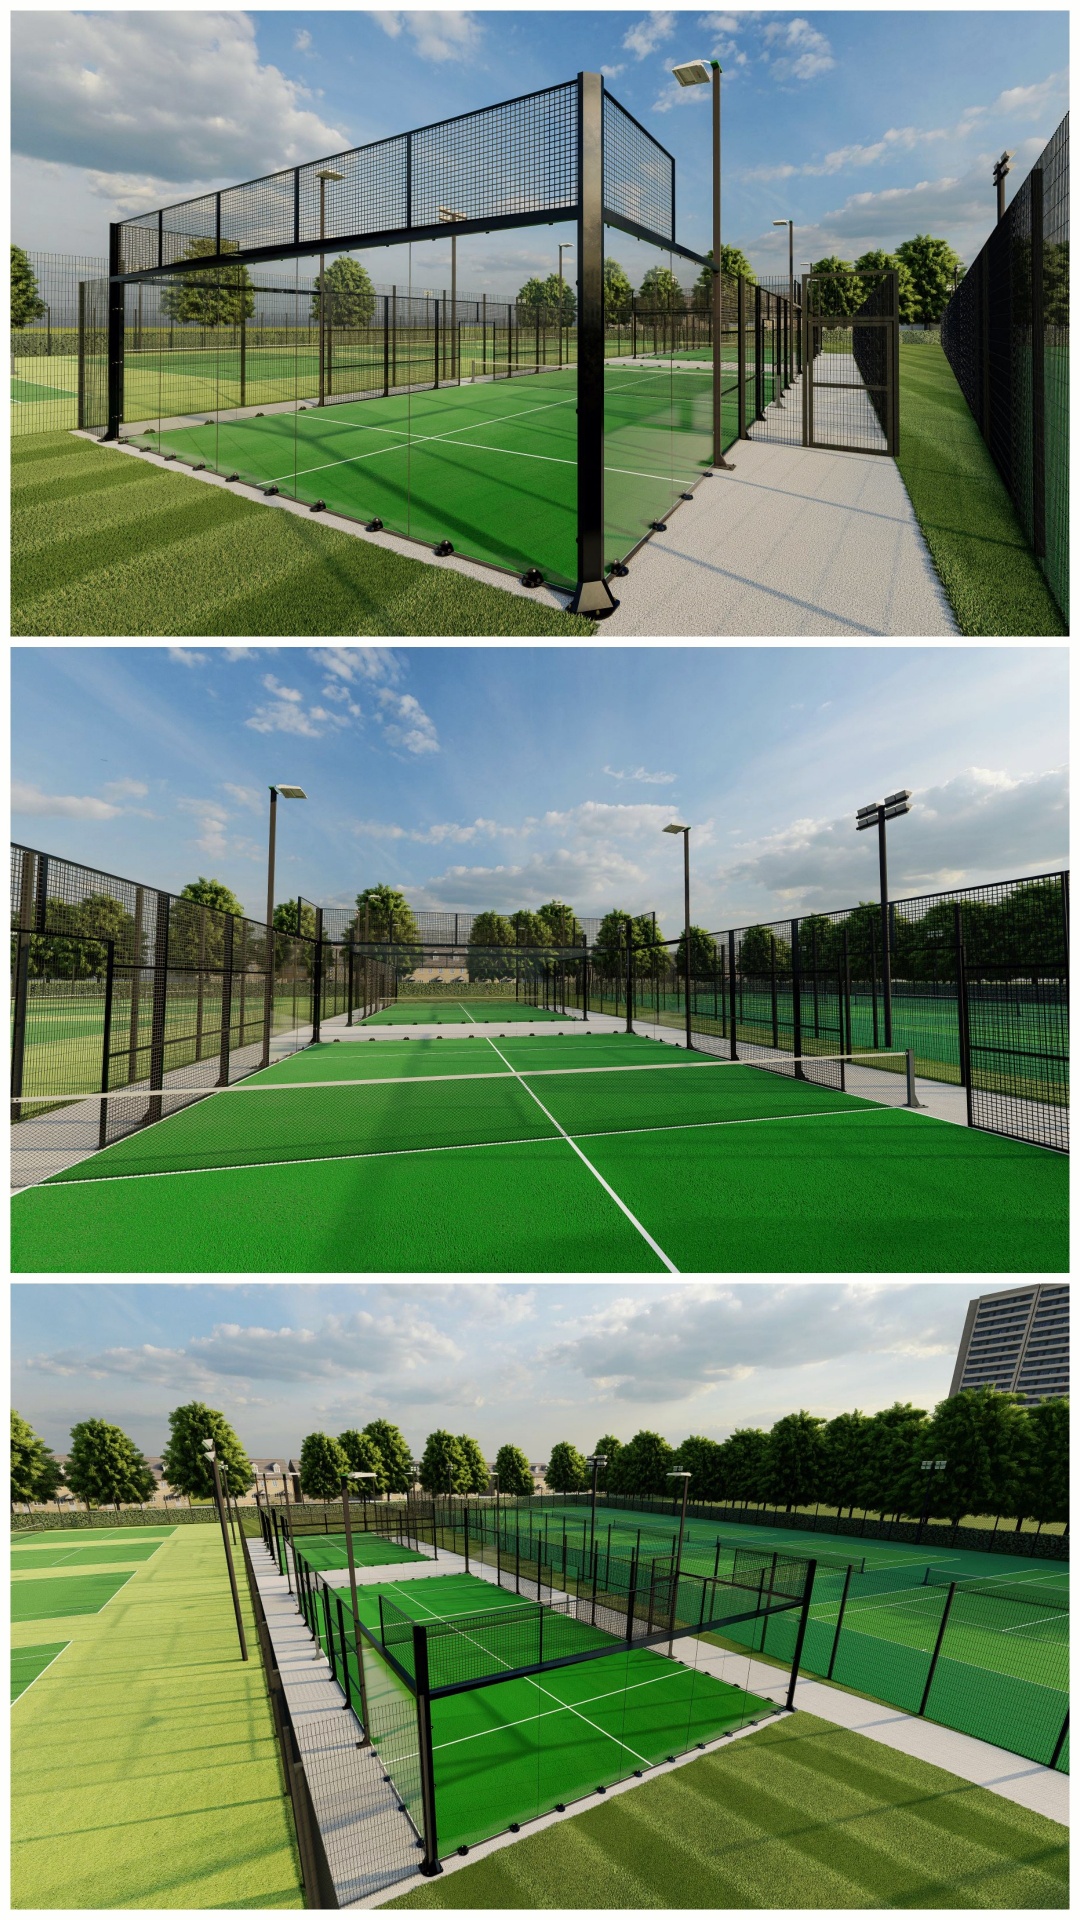 Planning Permission for new Padel Courts in Wandsworth